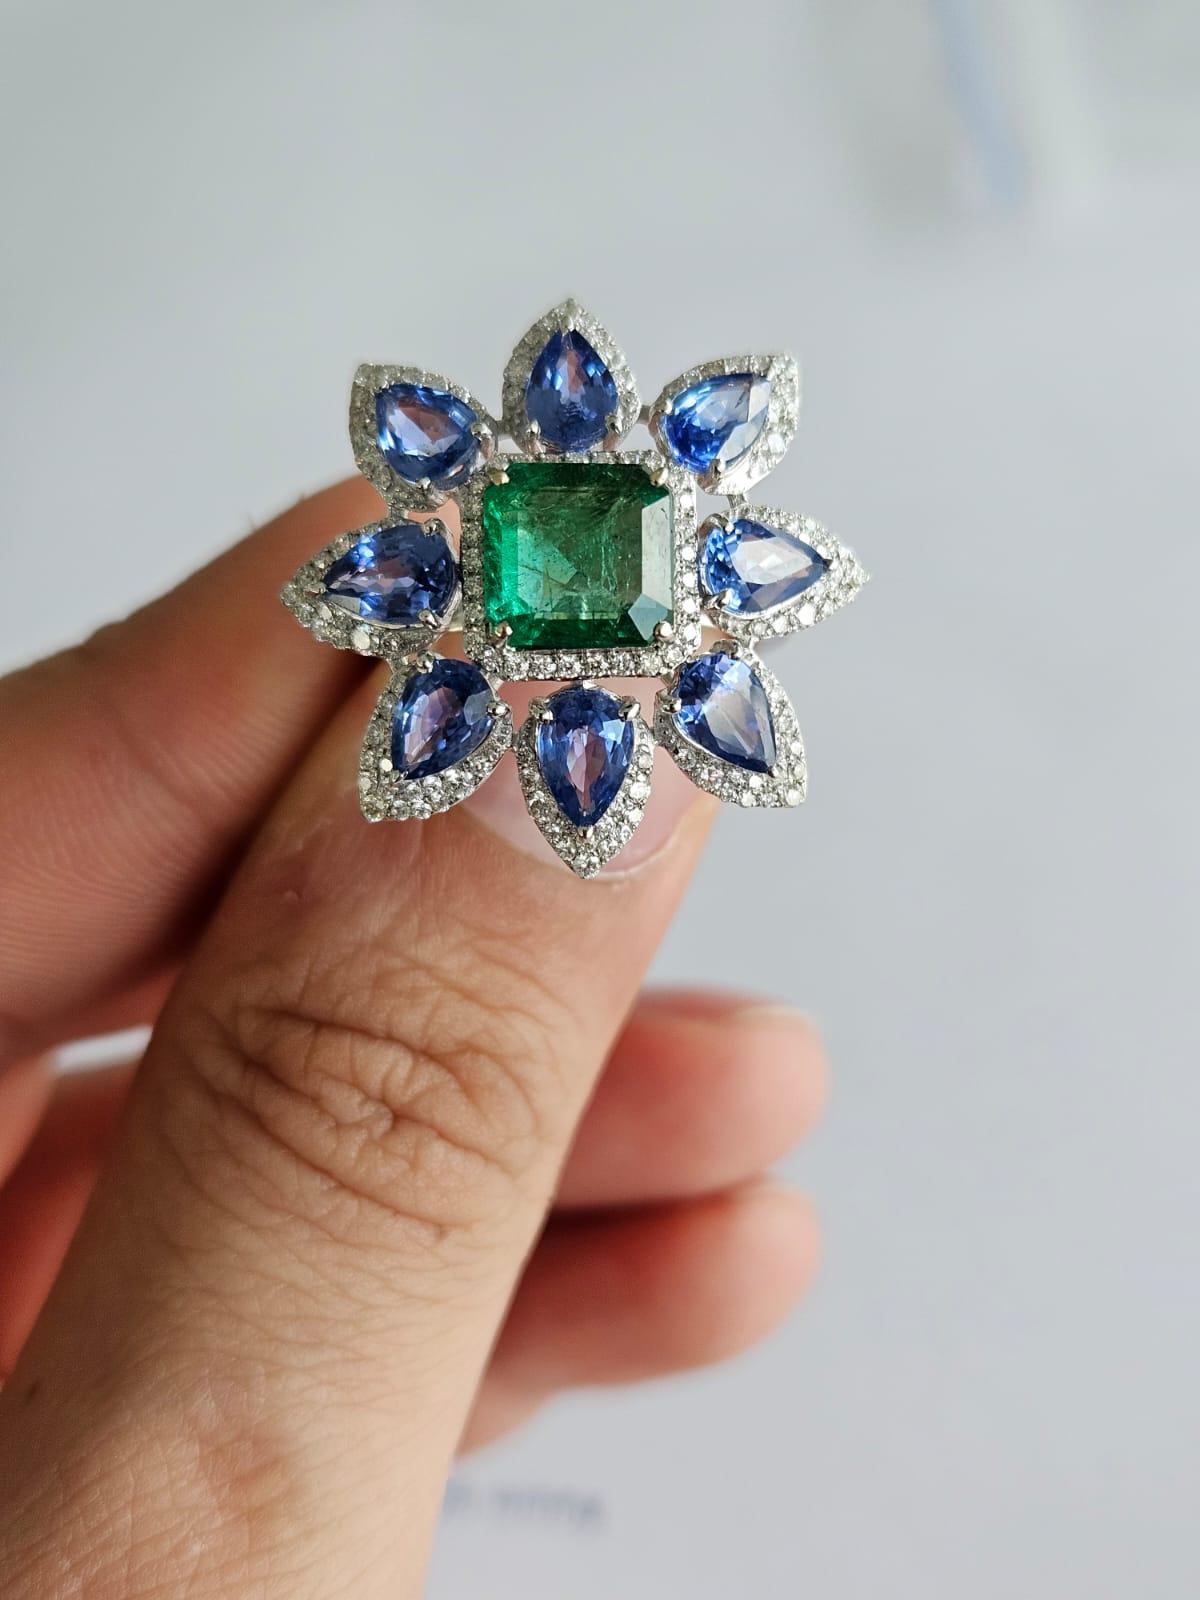 A very gorgeous and beautiful, modern style Emerald & Blue Sapphire Cocktail Ring set in 18K White Gold & Diamonds. The weight of the Emerald is 2.08 carats. The square shaped Emerald is completely natural, without any treatment and is of Zambian